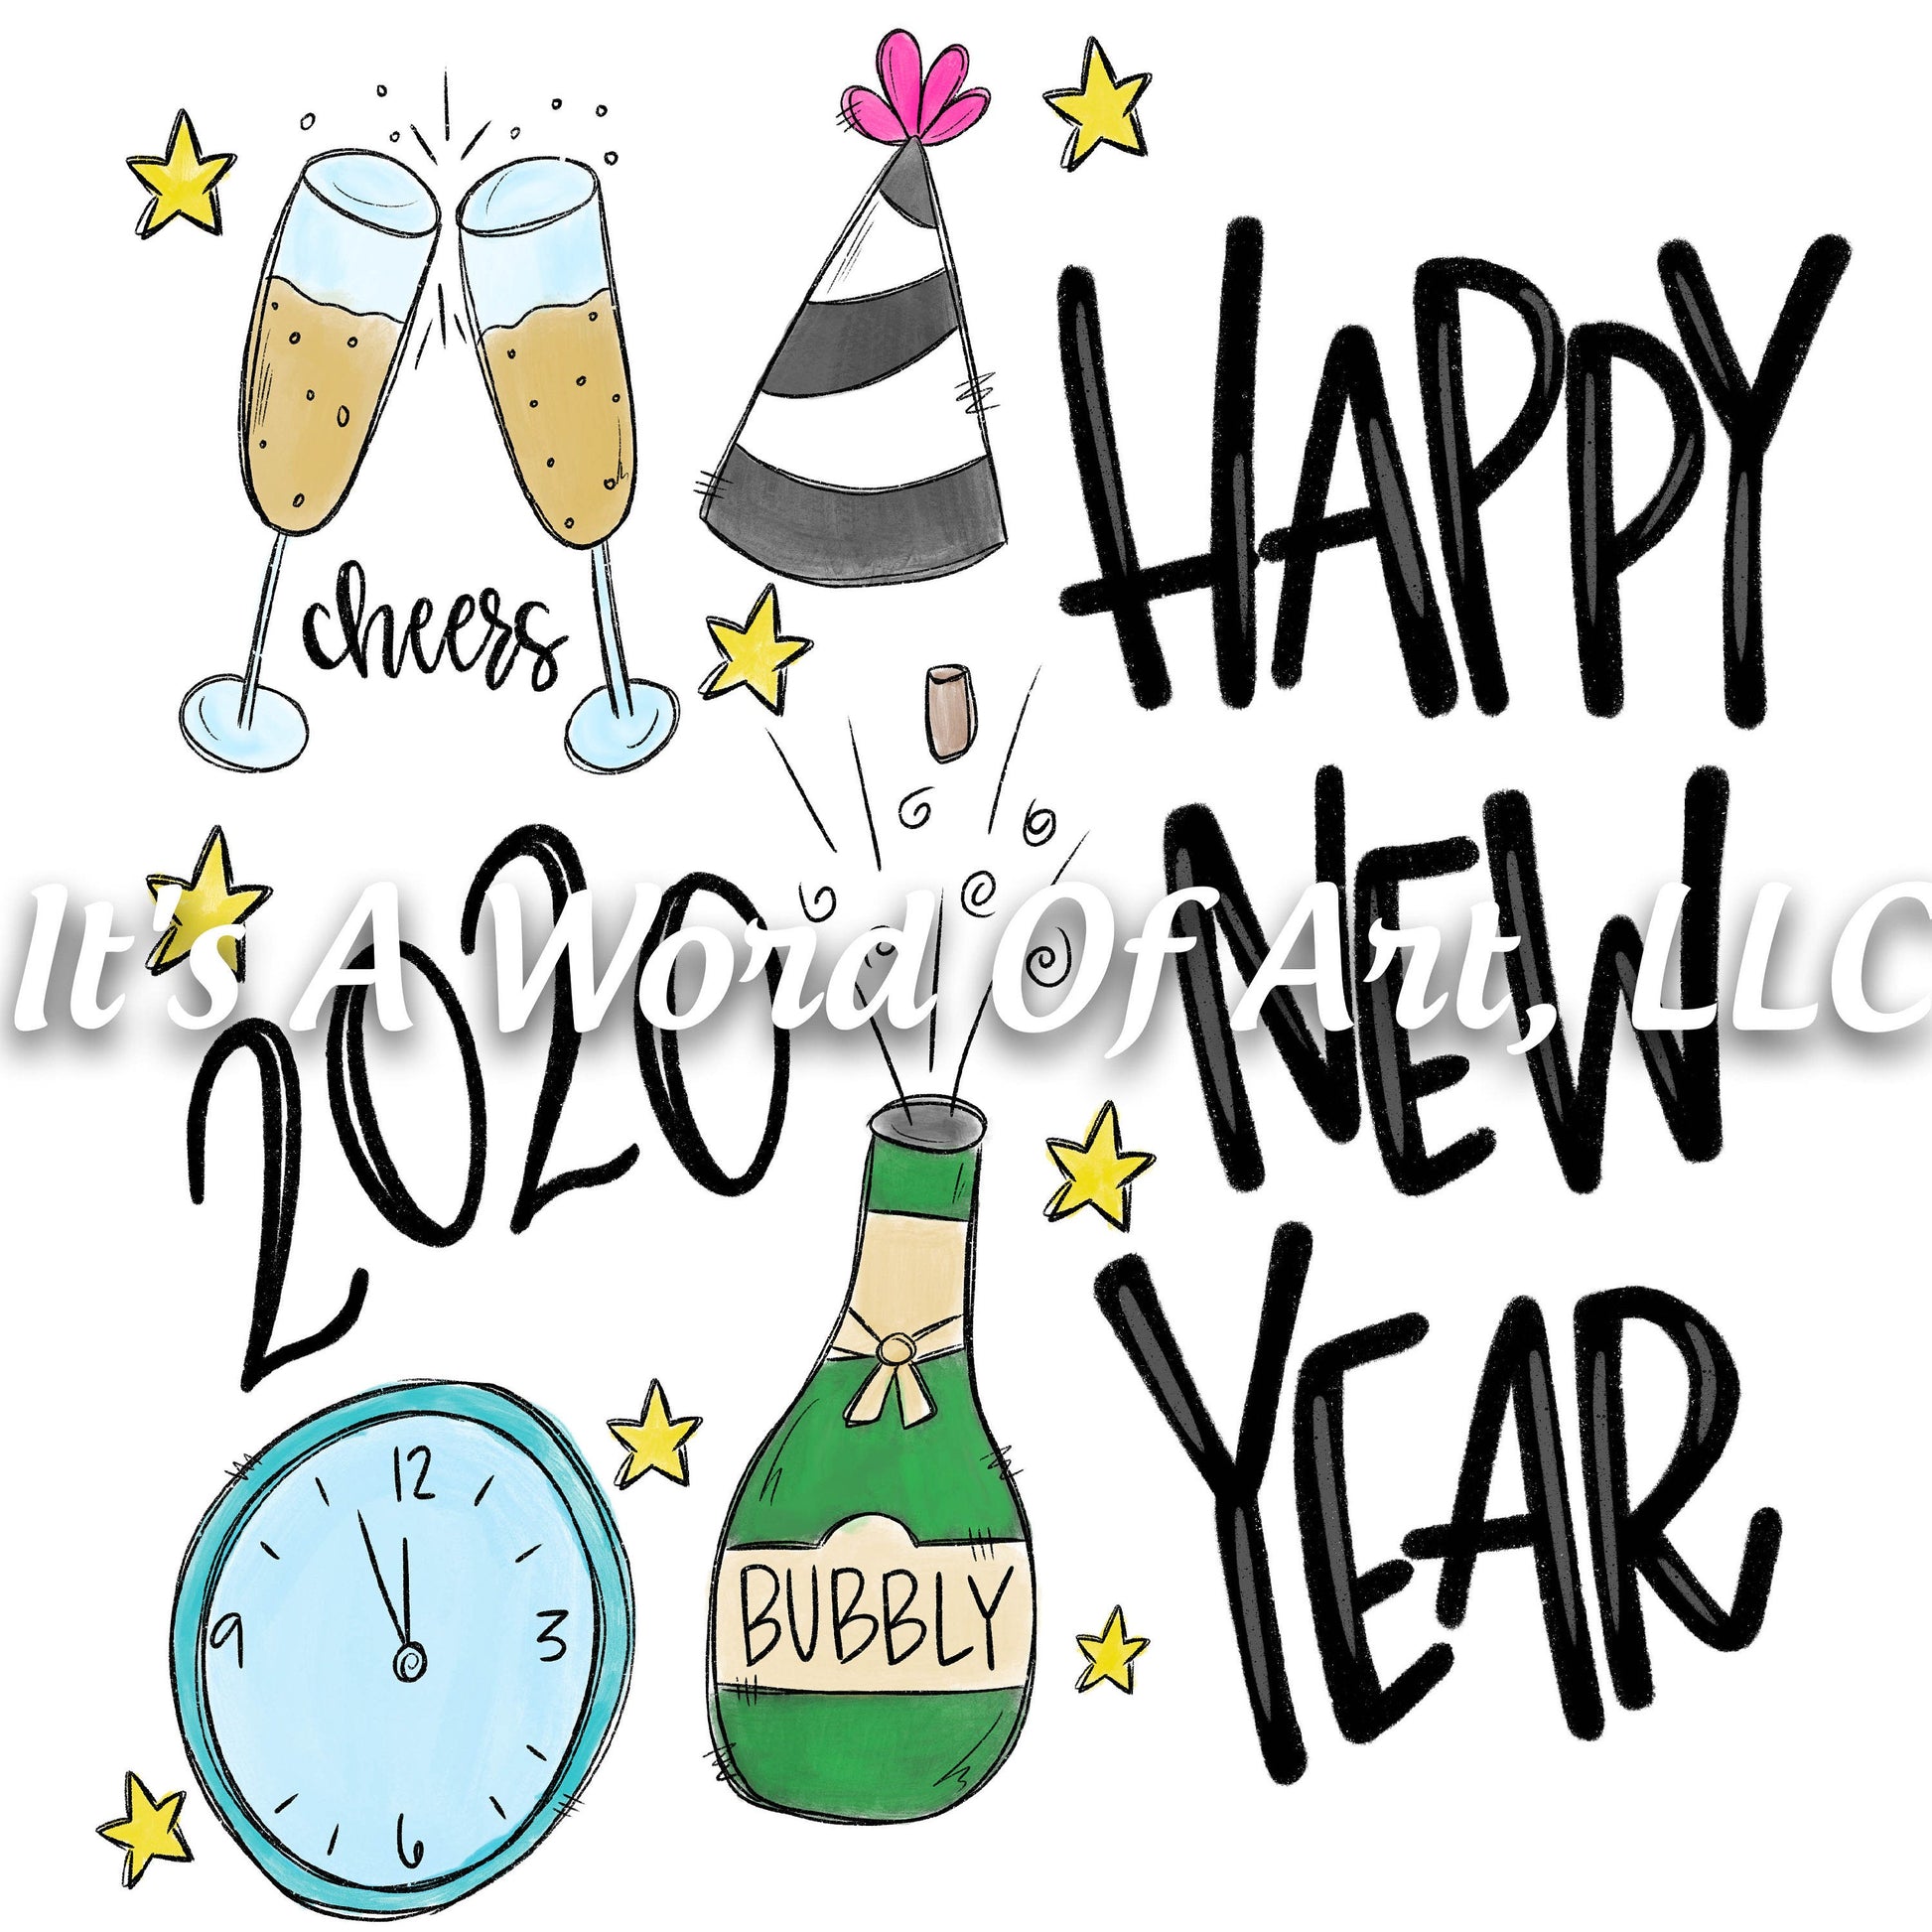 New Years 10 - Happy New Year 2020 Bubbly Cheers - Sublimation Transfer Set/Ready To Press Sublimation Transfer/Sublimation Transfer